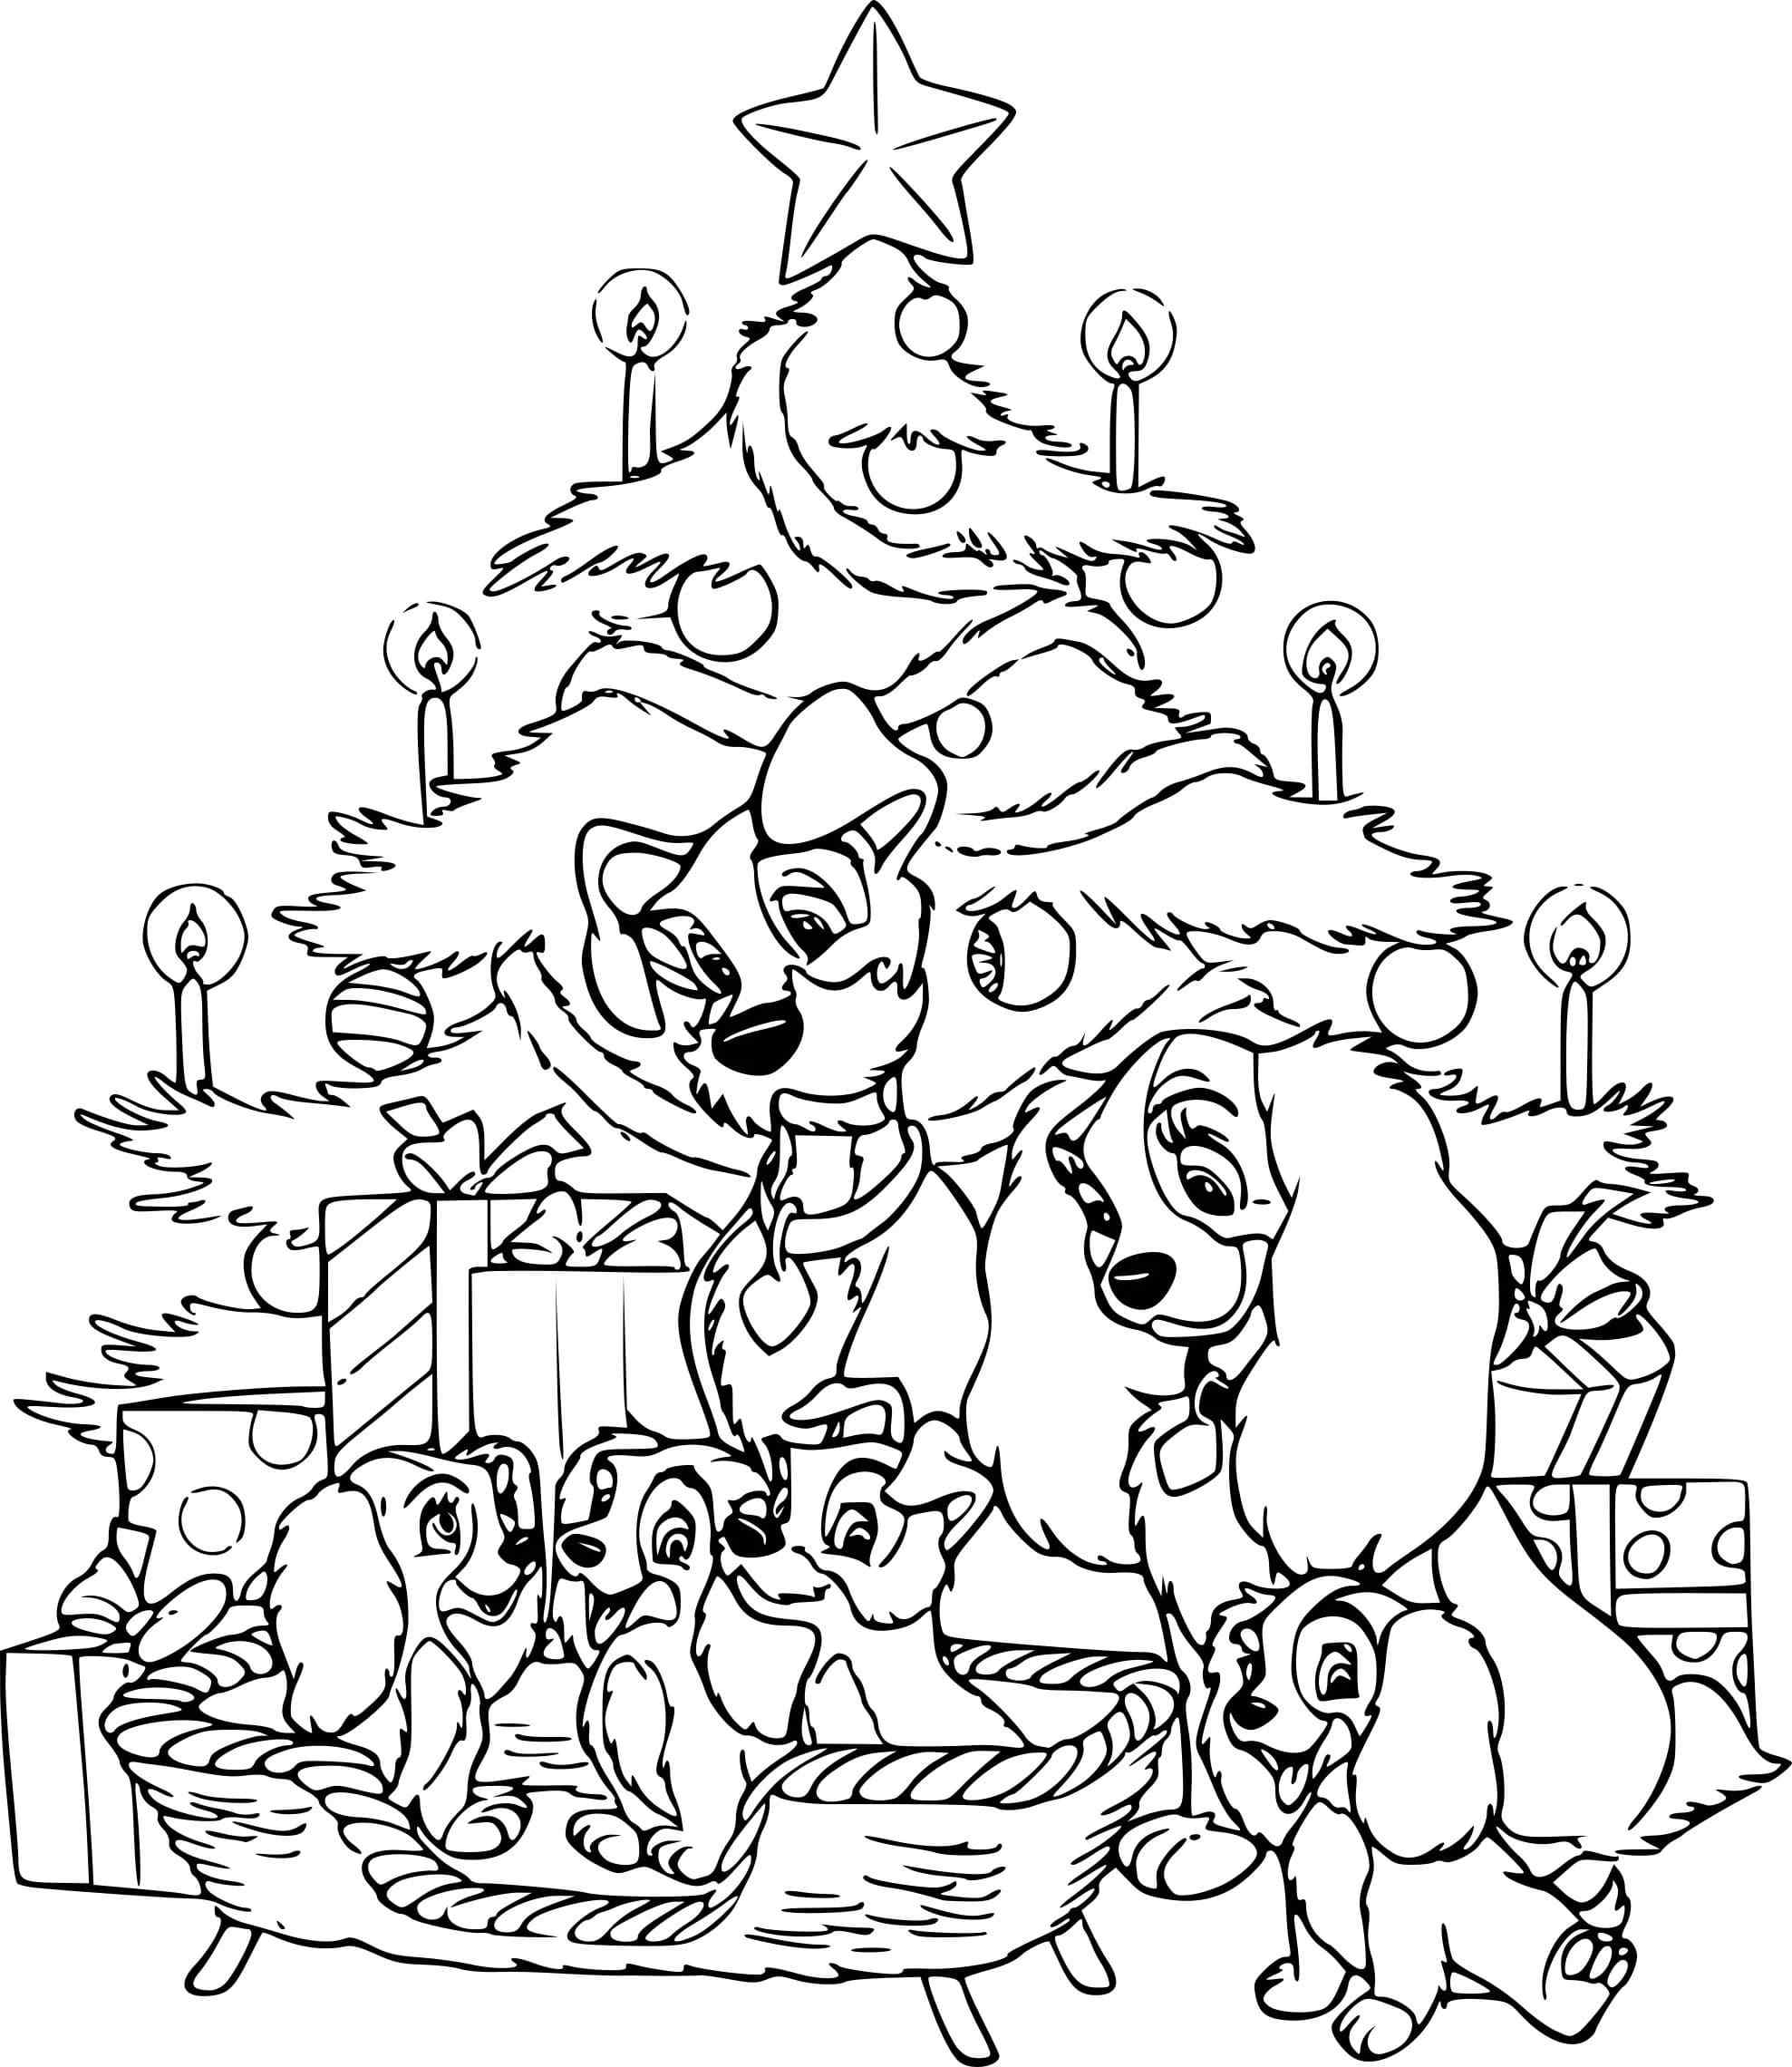 Christmas In A Family Of Dogs Coloring Page